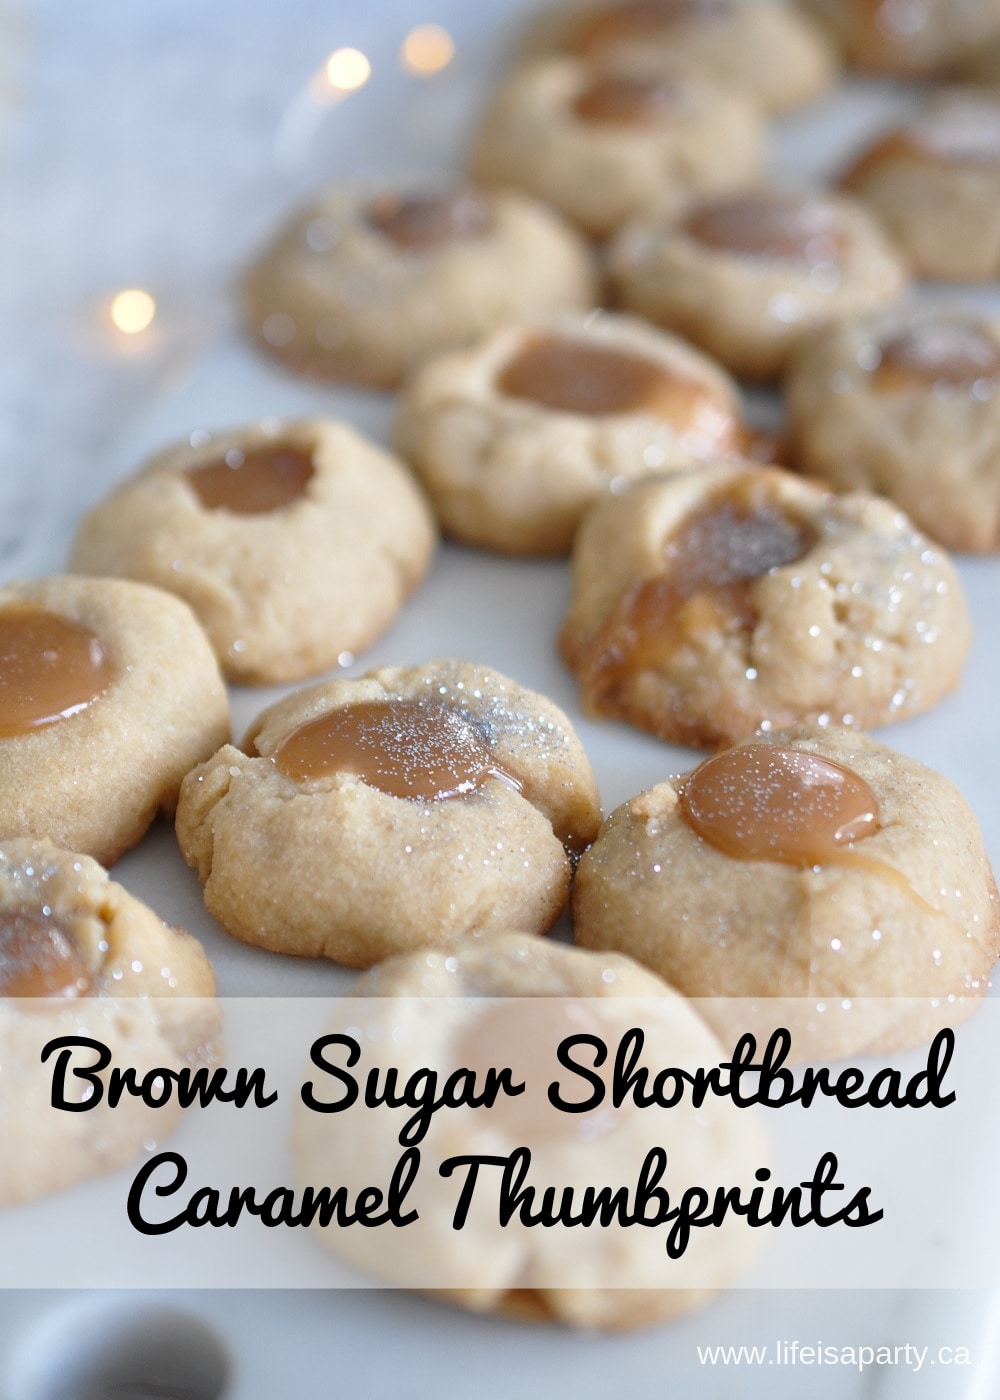 Brown Sugar Shortbread Caramel Thumbprint Cookies: The brown sugar makes the shortbread cookie rich and the oozy, gooey caramel centres are perfect.